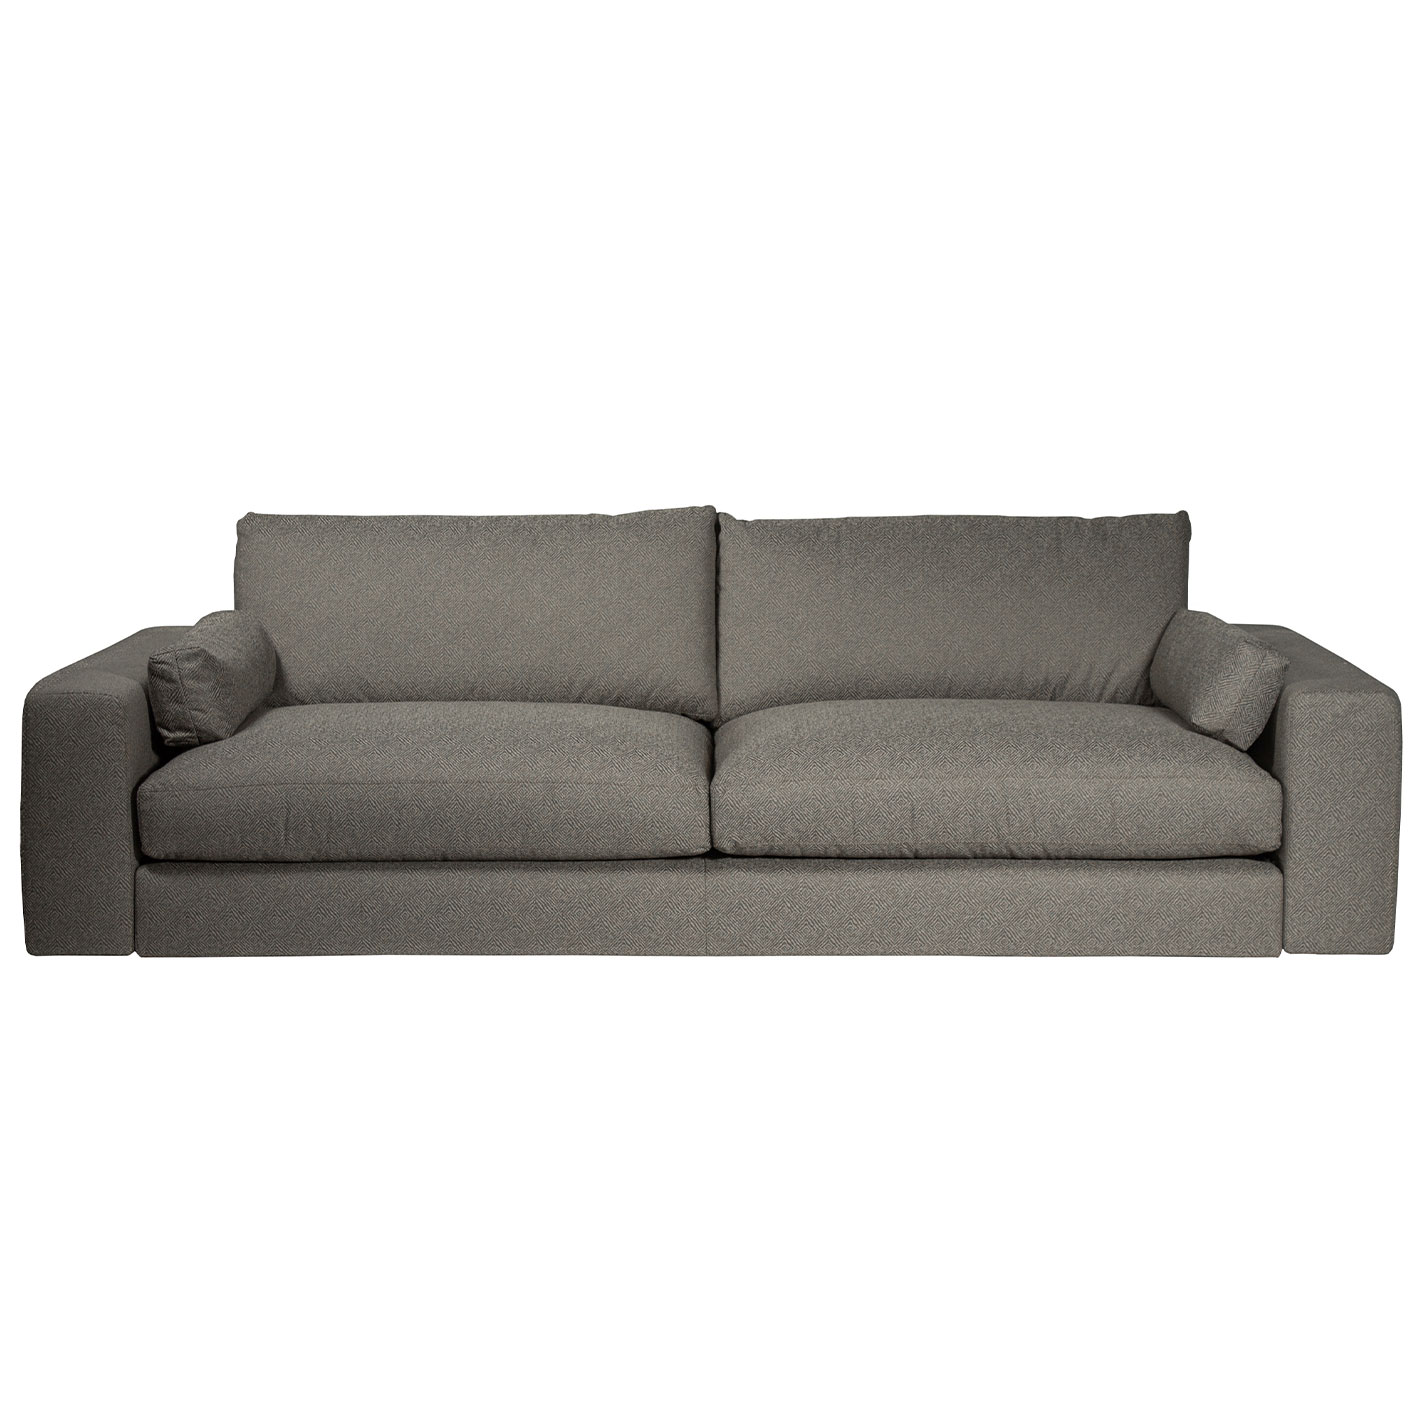 Sofas im Outlet - SUMMER MILANO OUTLET Einzelsofa